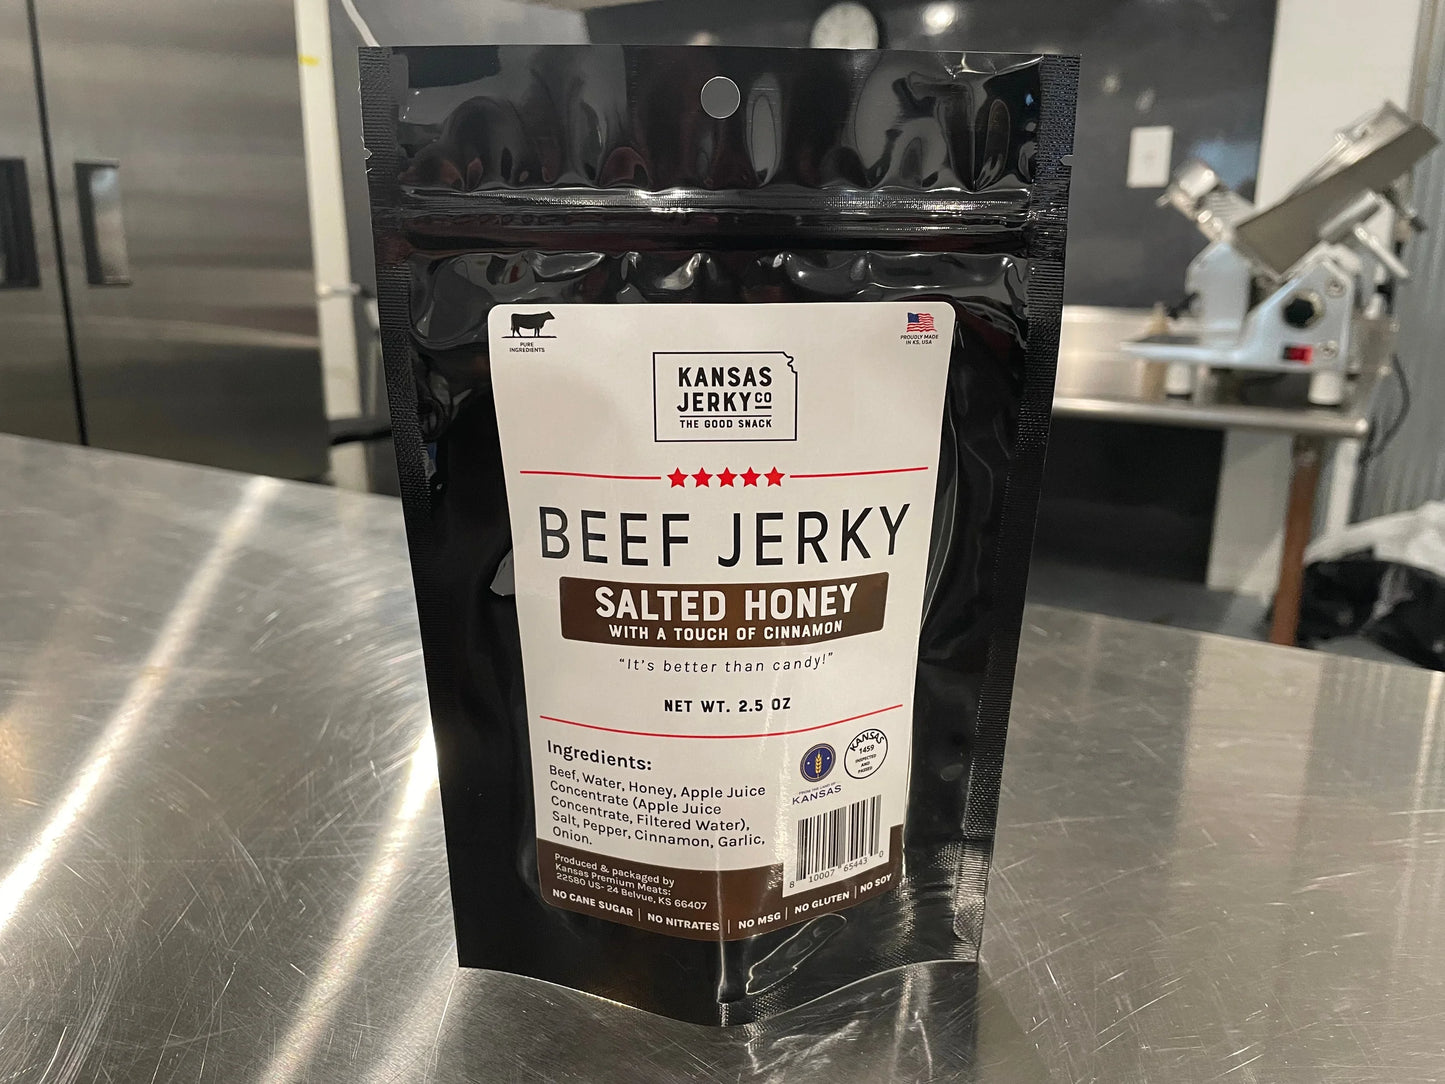 Beef Jerky - Salted Honey (5 bags - ships to Kansas addresses only)